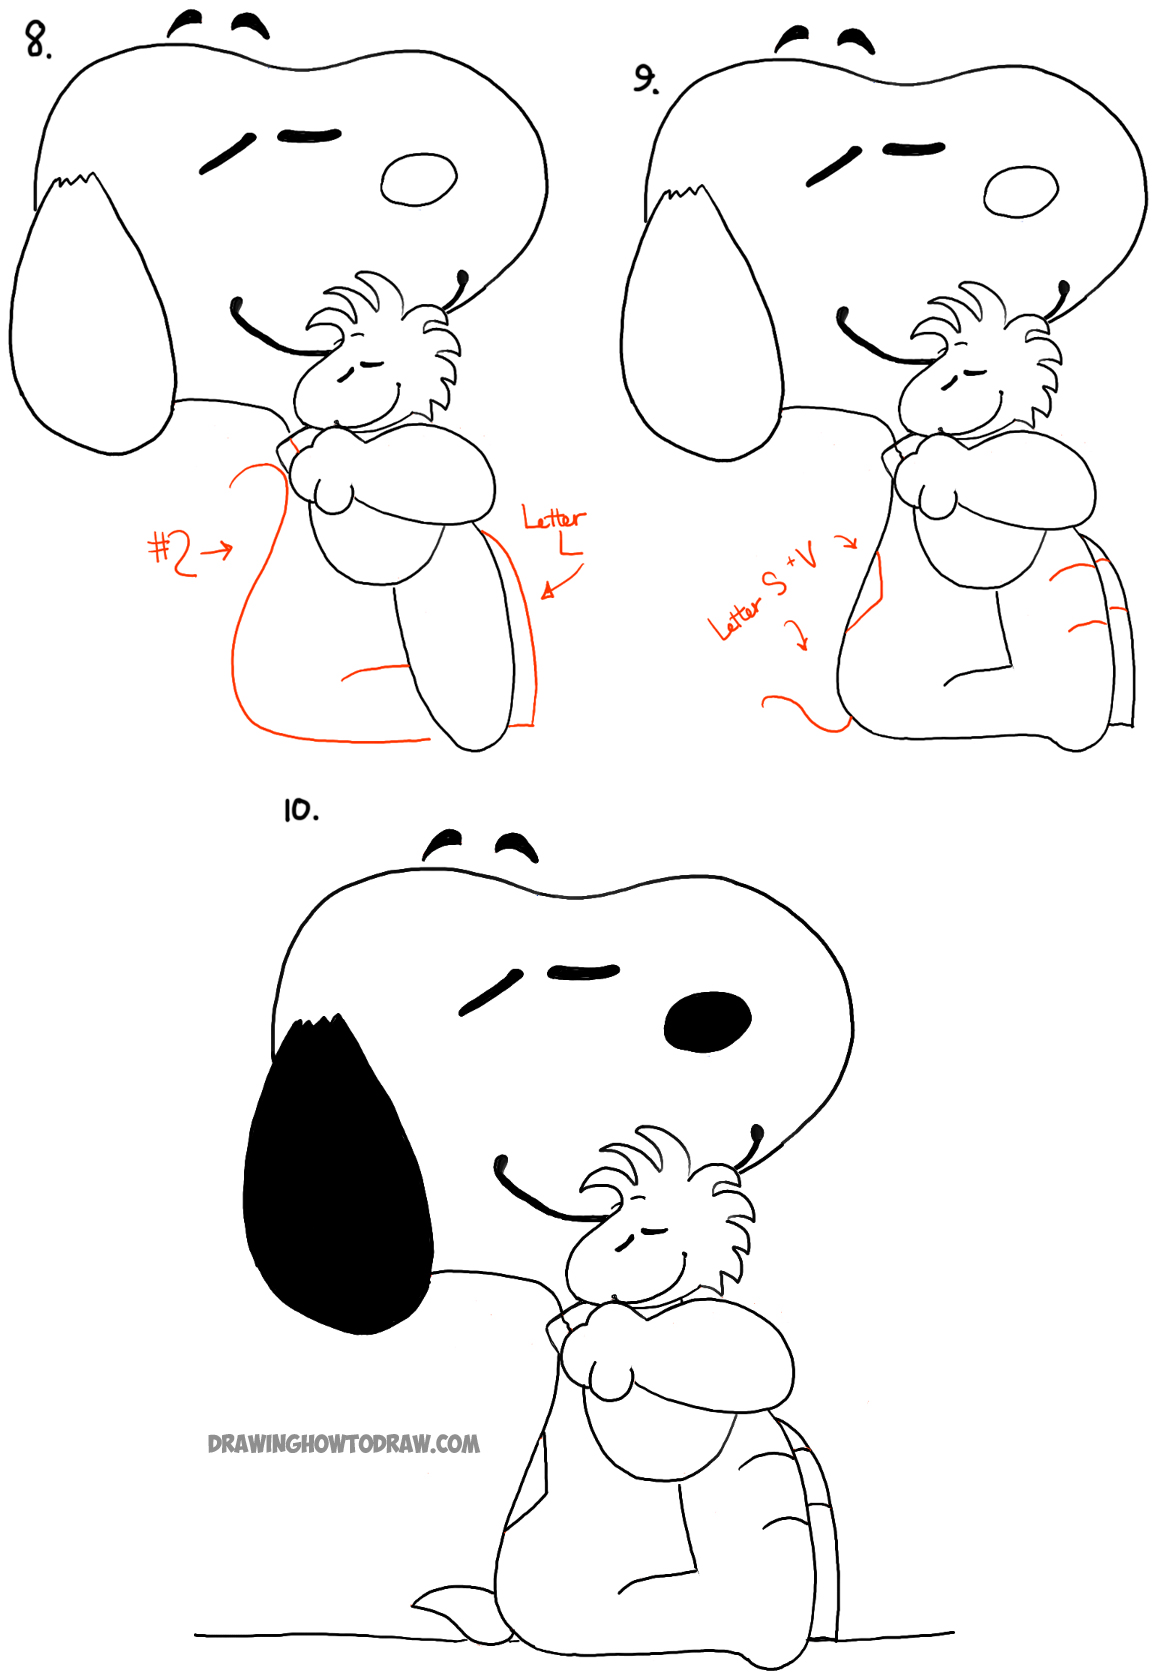 Learn how to draw Snoopy hugging woodstock with simple drawing lessons